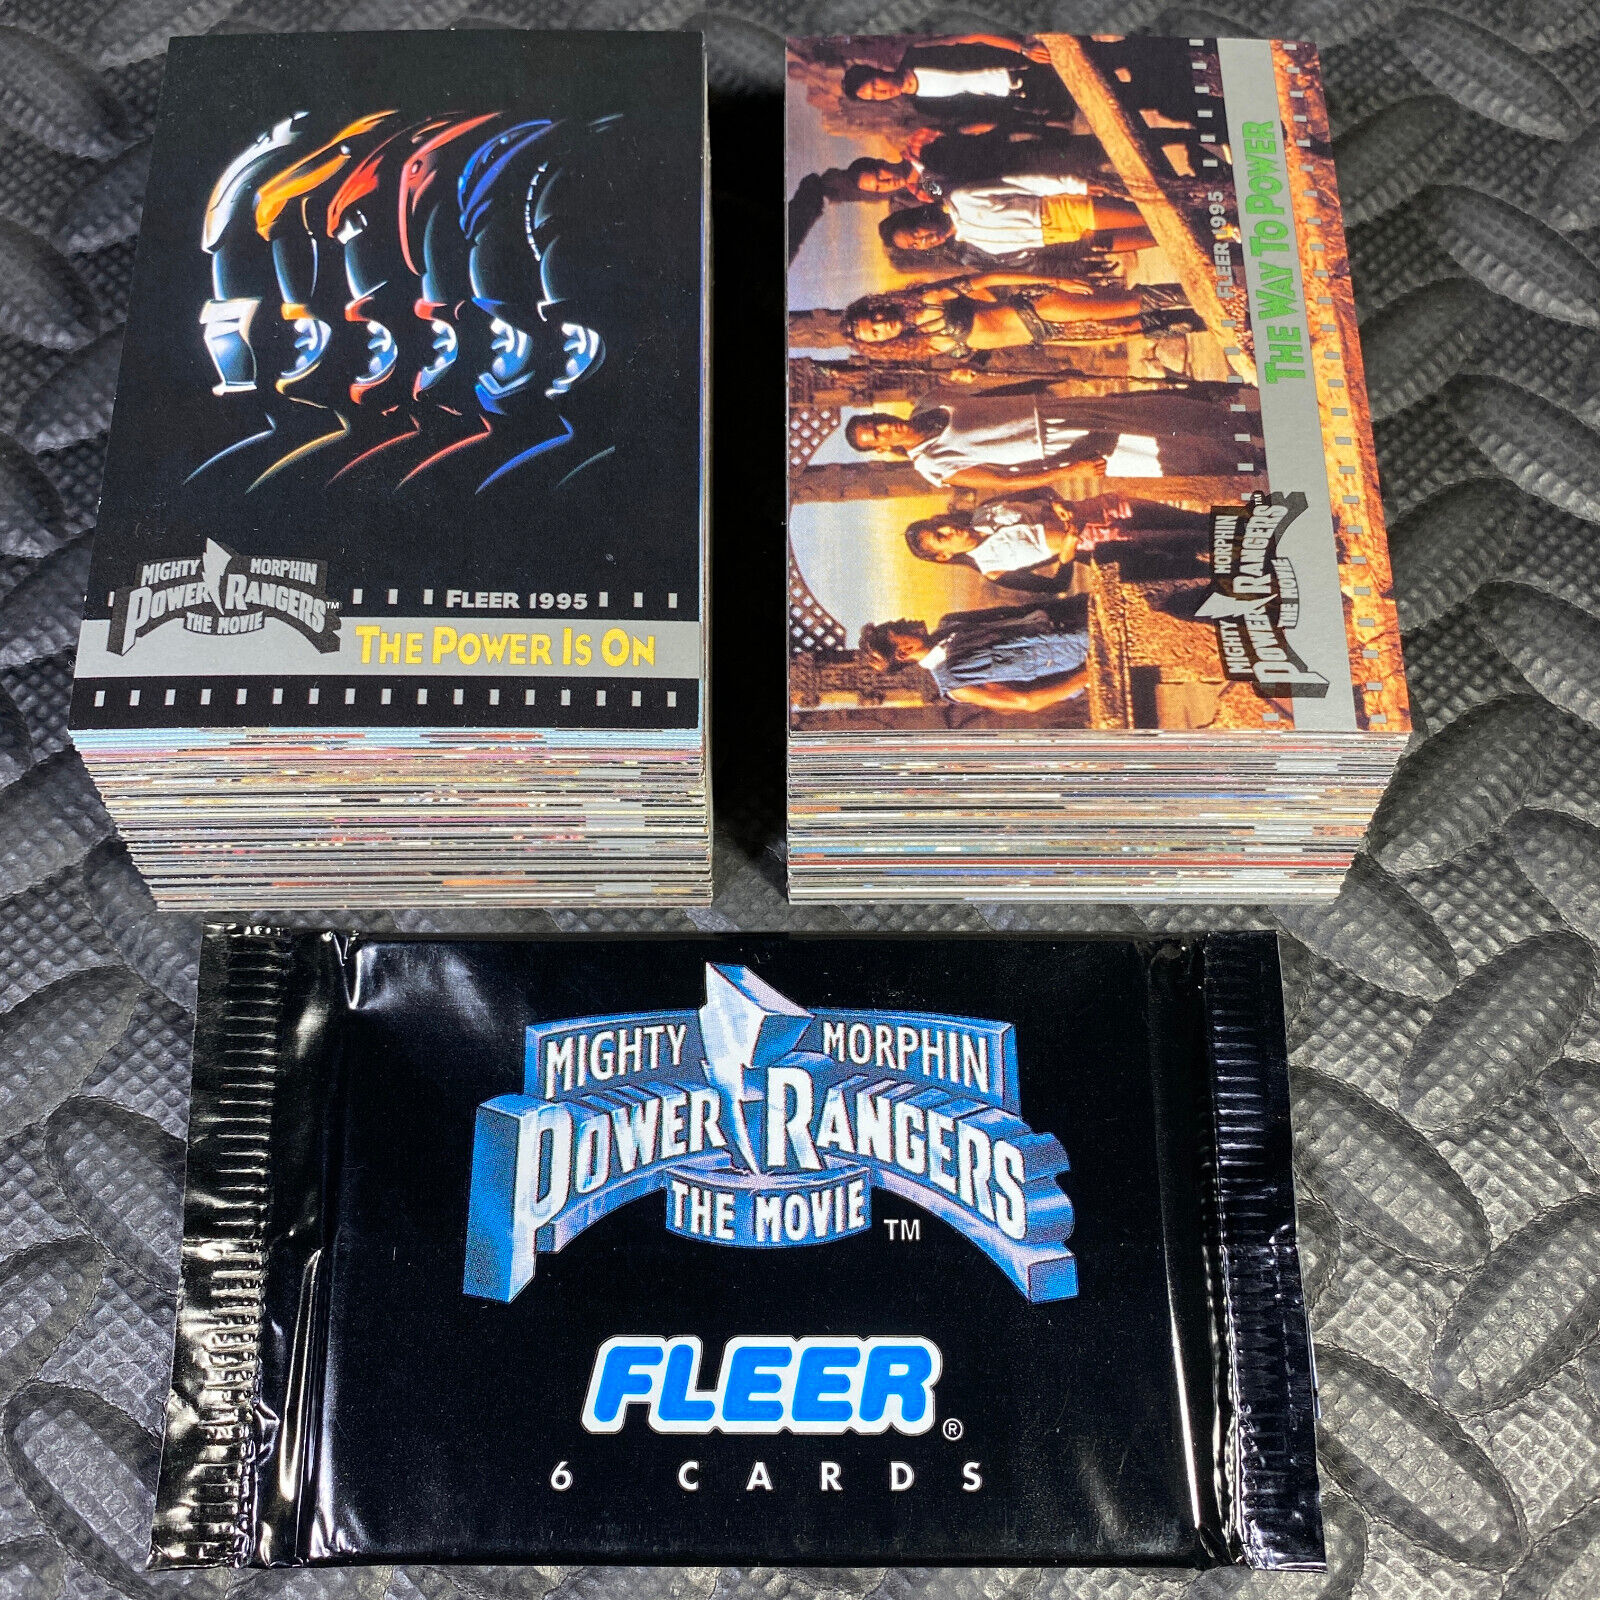 POWER RANGERS THE MOVIE COMPLETE 150-CARD TRADING CARDS SET 1995 FLEER +WRAPPER